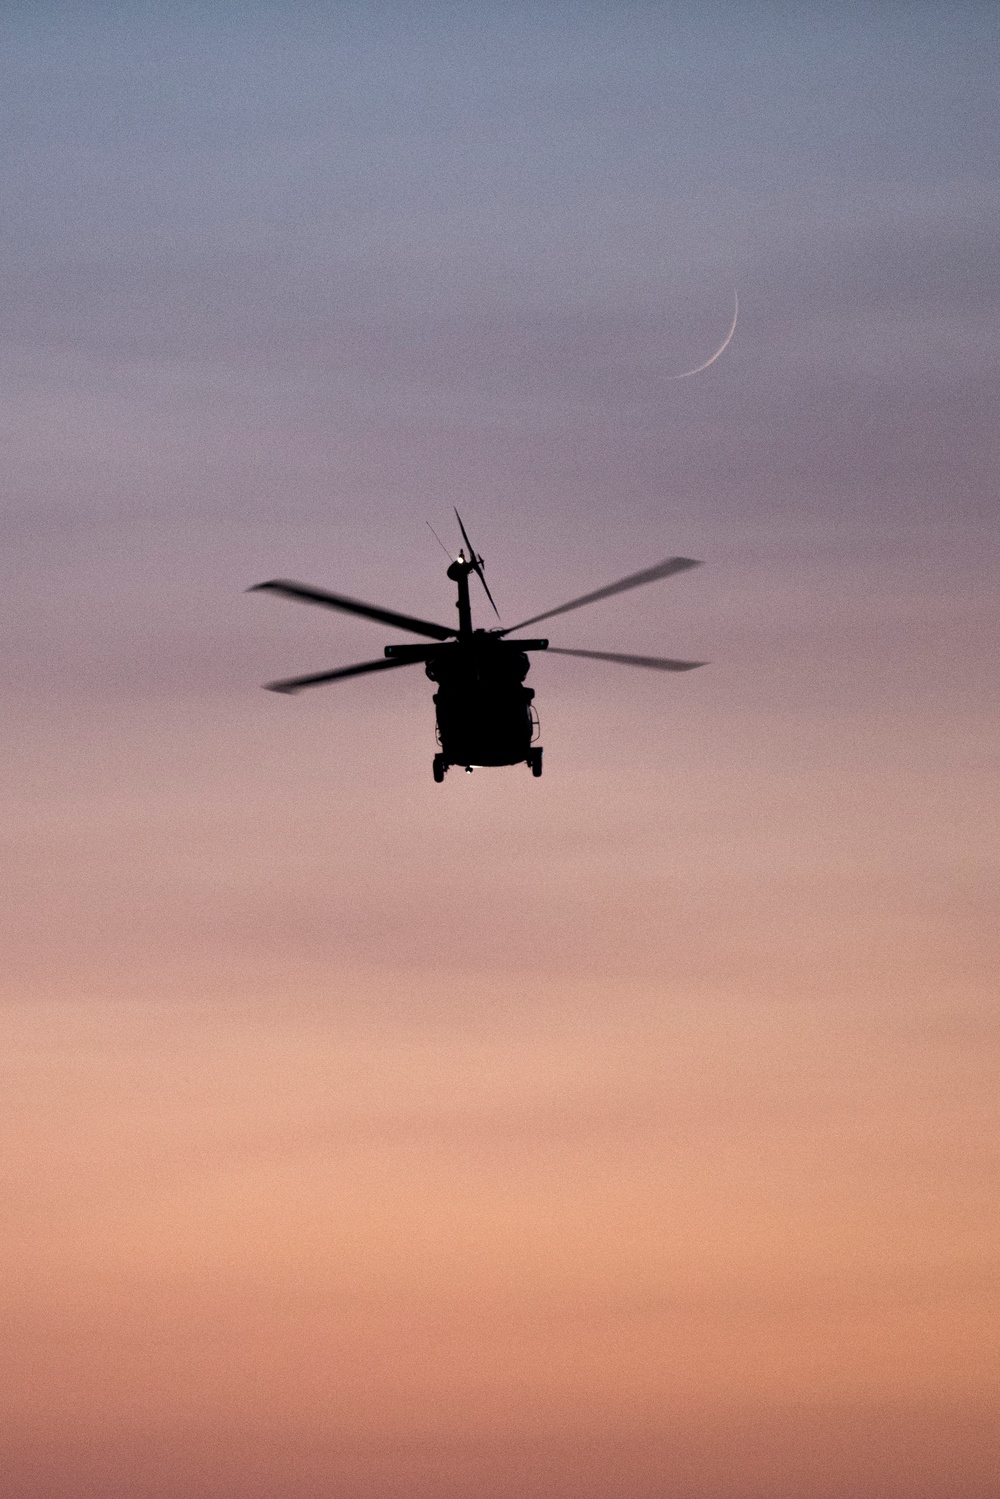 Idaho's Black Hawk helicopter flying in the sunset